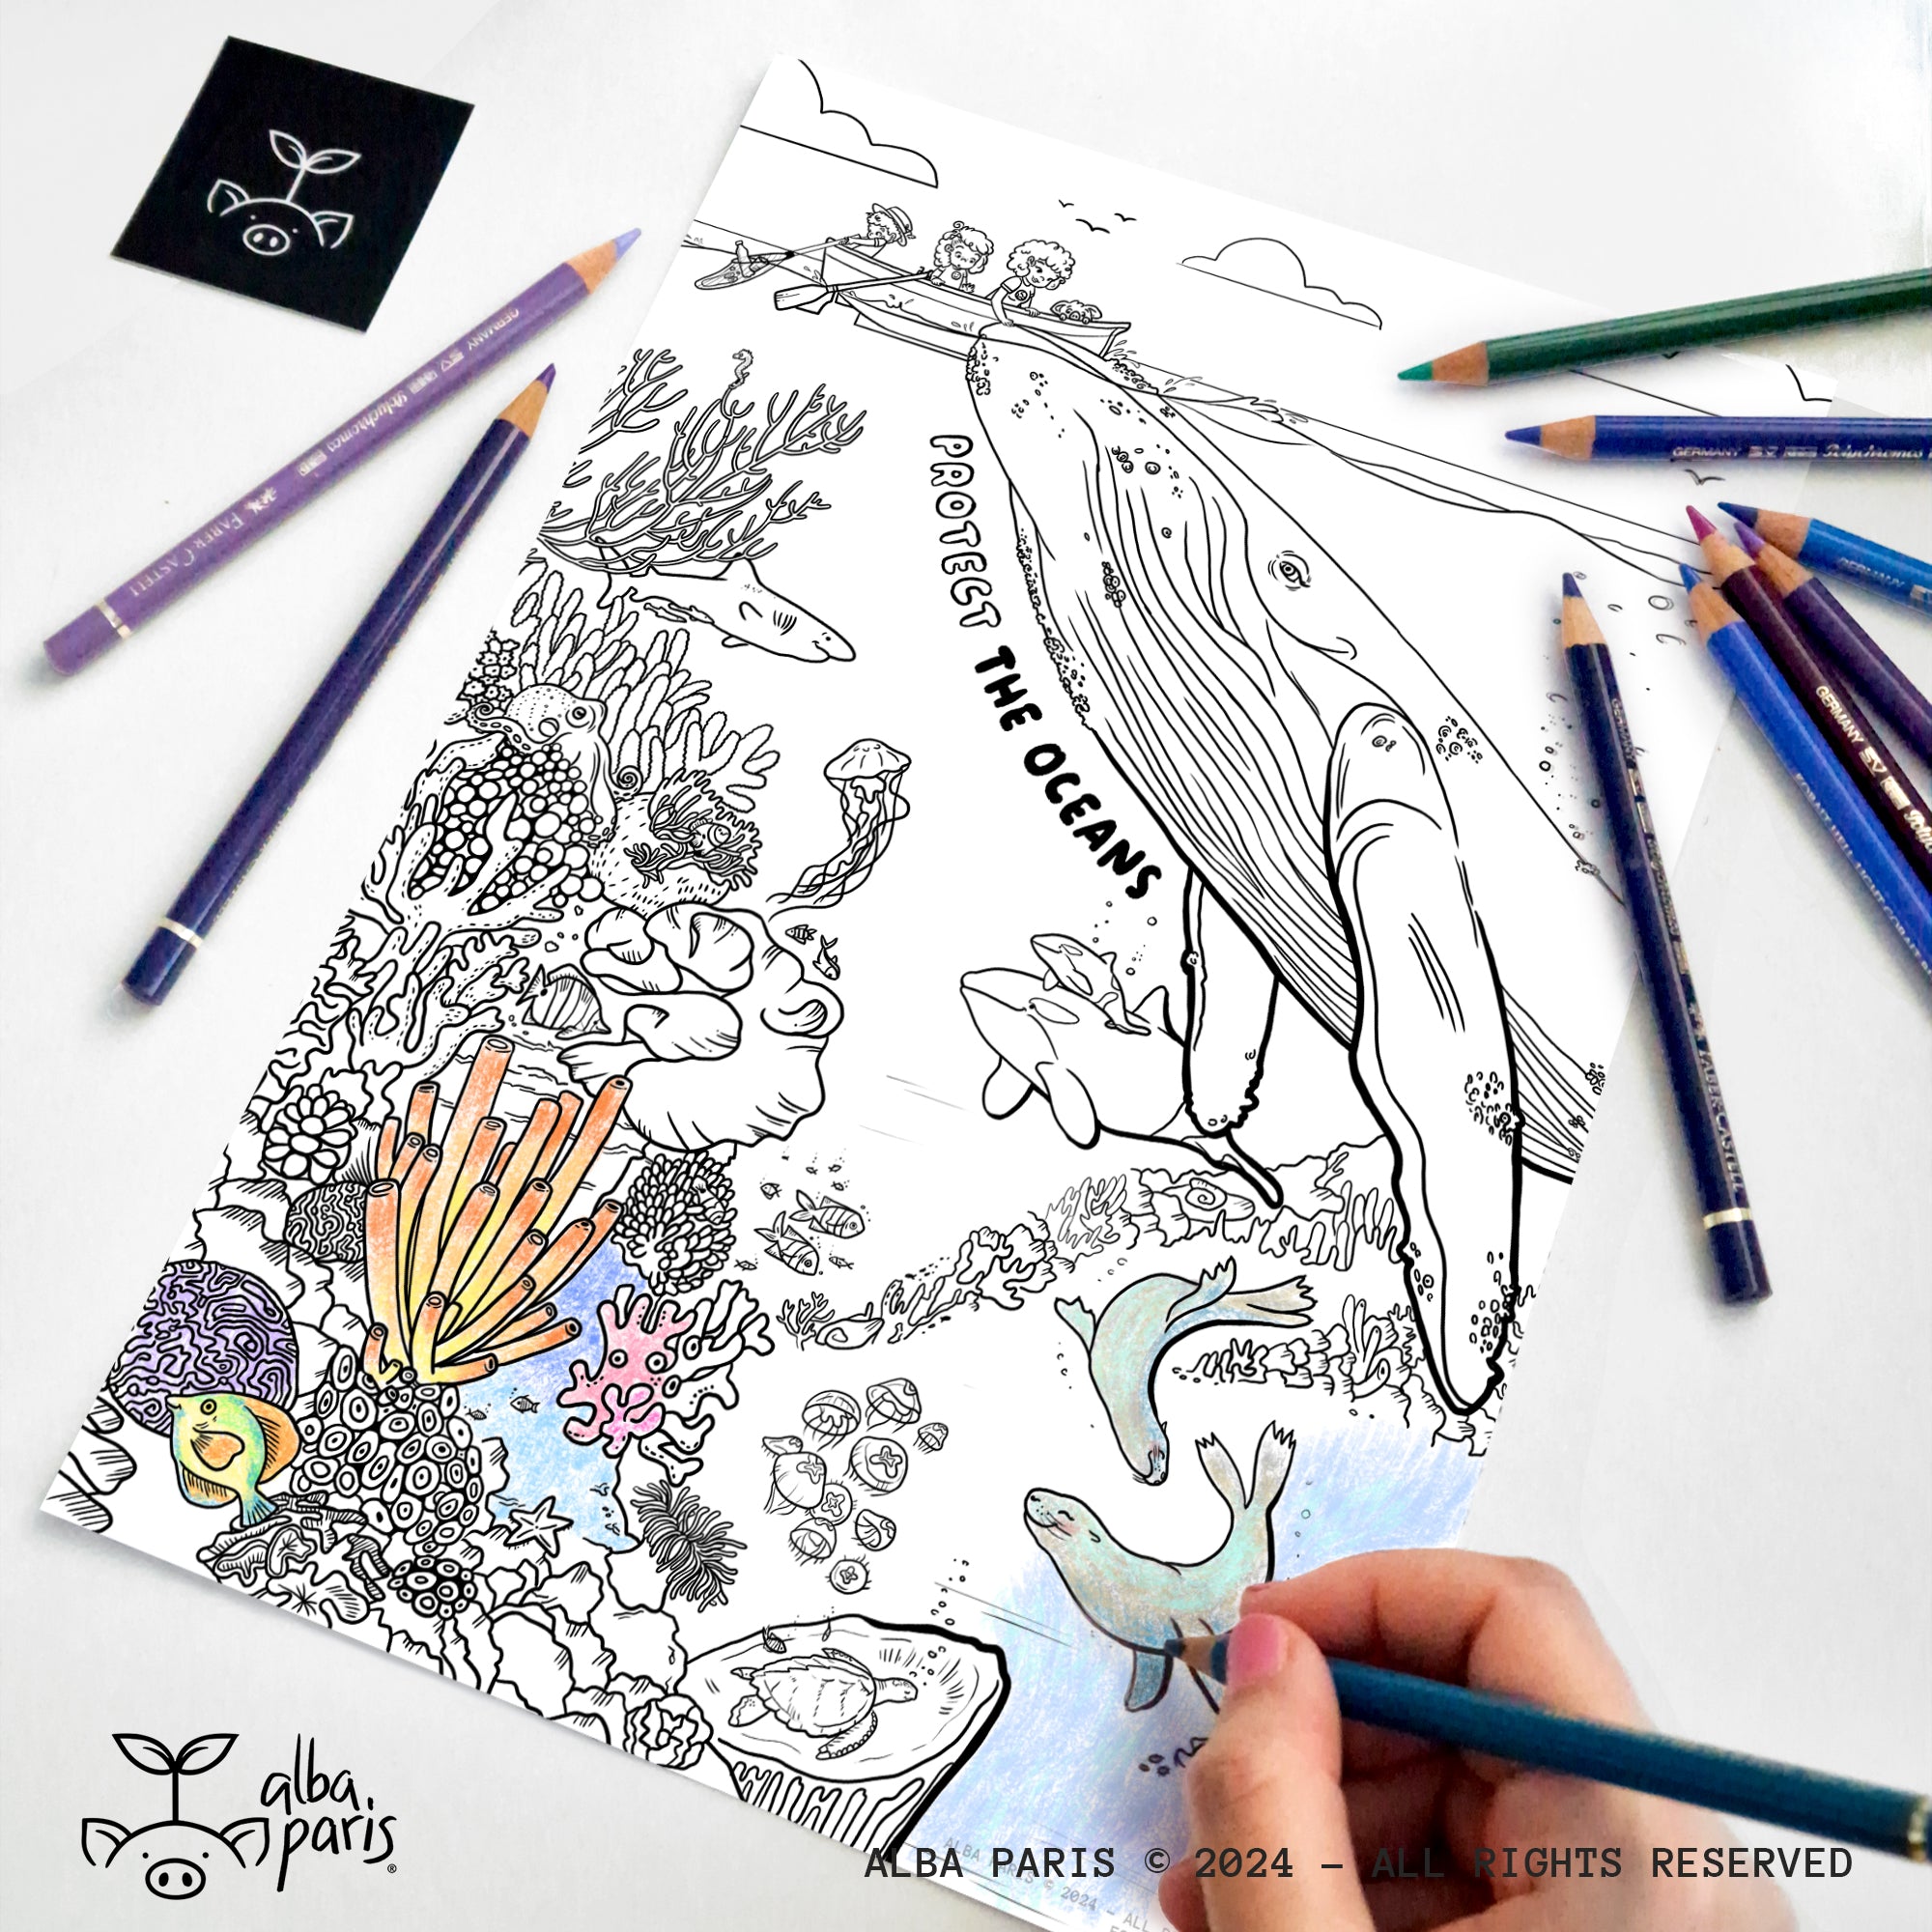 Protect The Oceans Coloring Page (In English And Spanish)